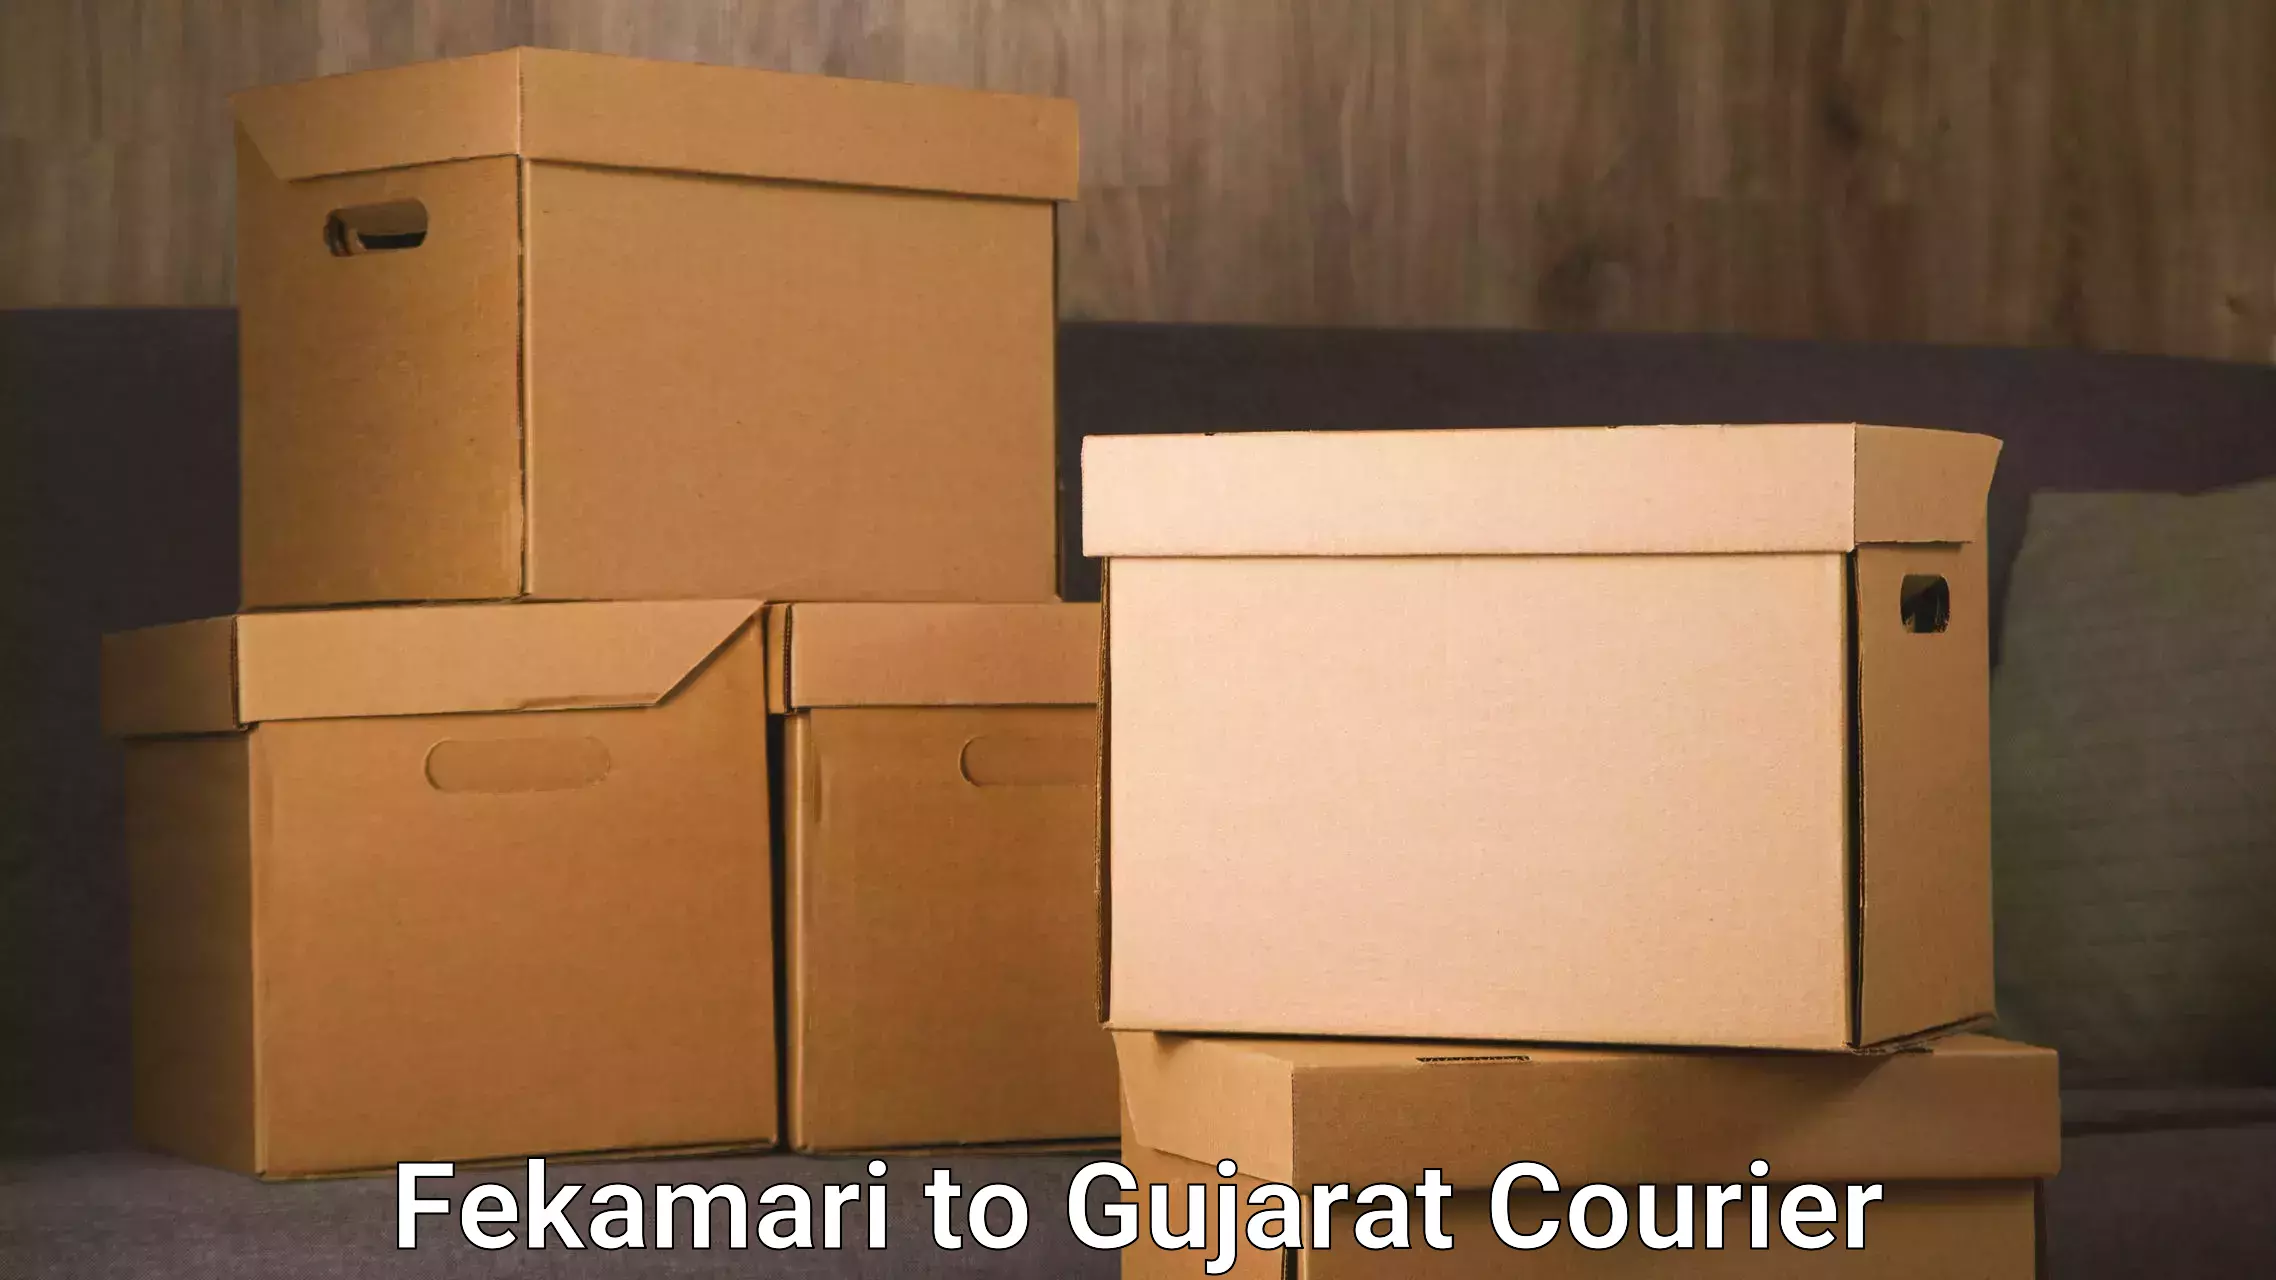 Overnight delivery services Fekamari to Dwarka